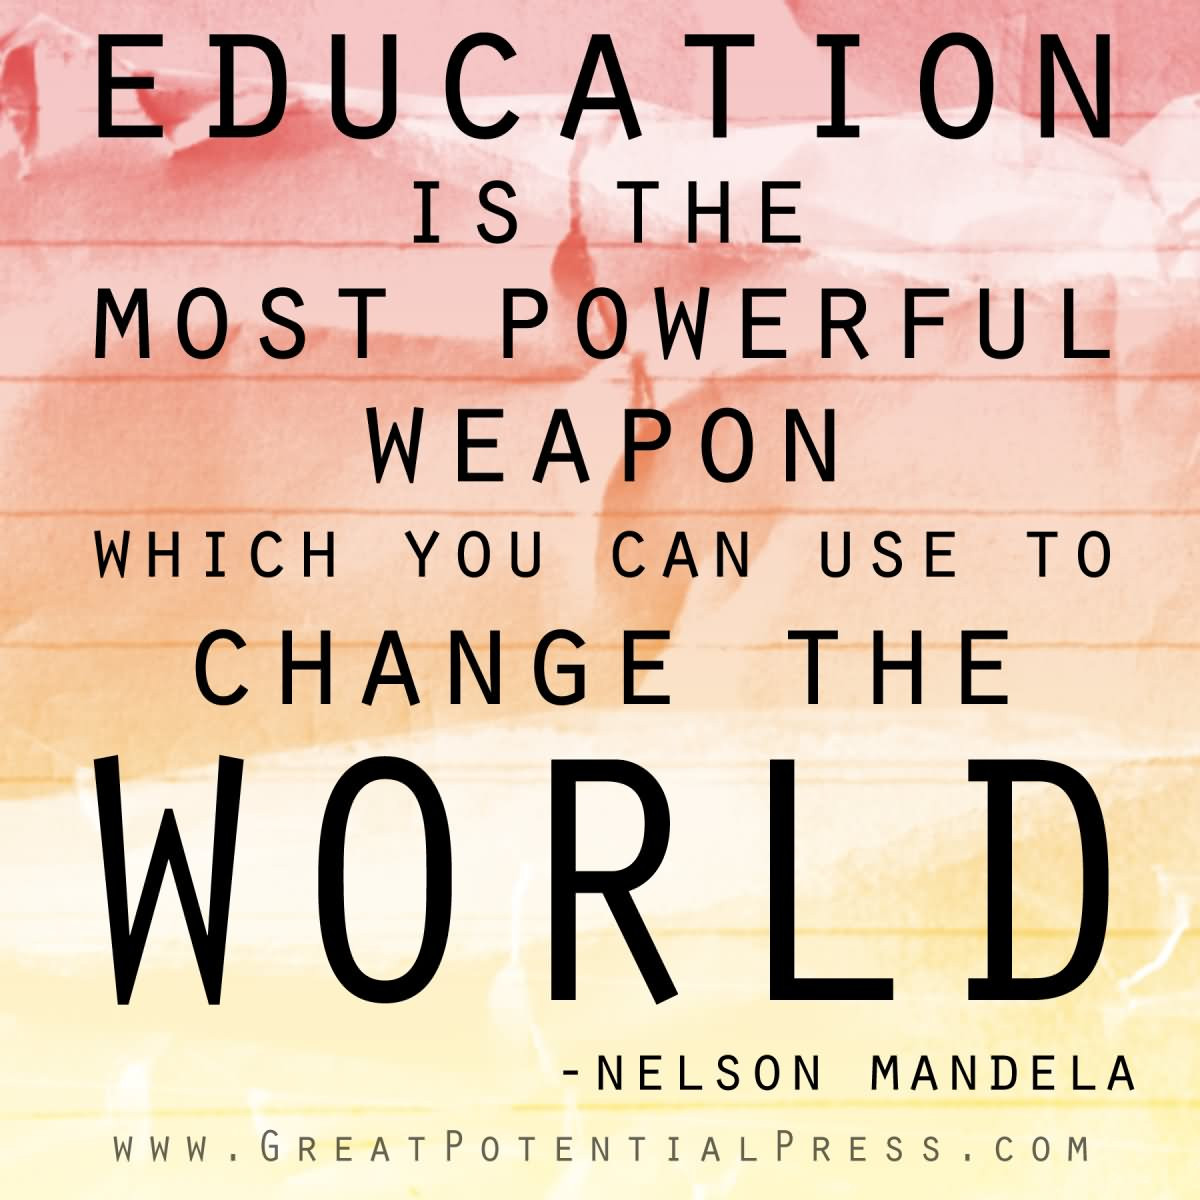 Nelson Mandela Quotes Education
 Education is the most powerful weapon which you can use to